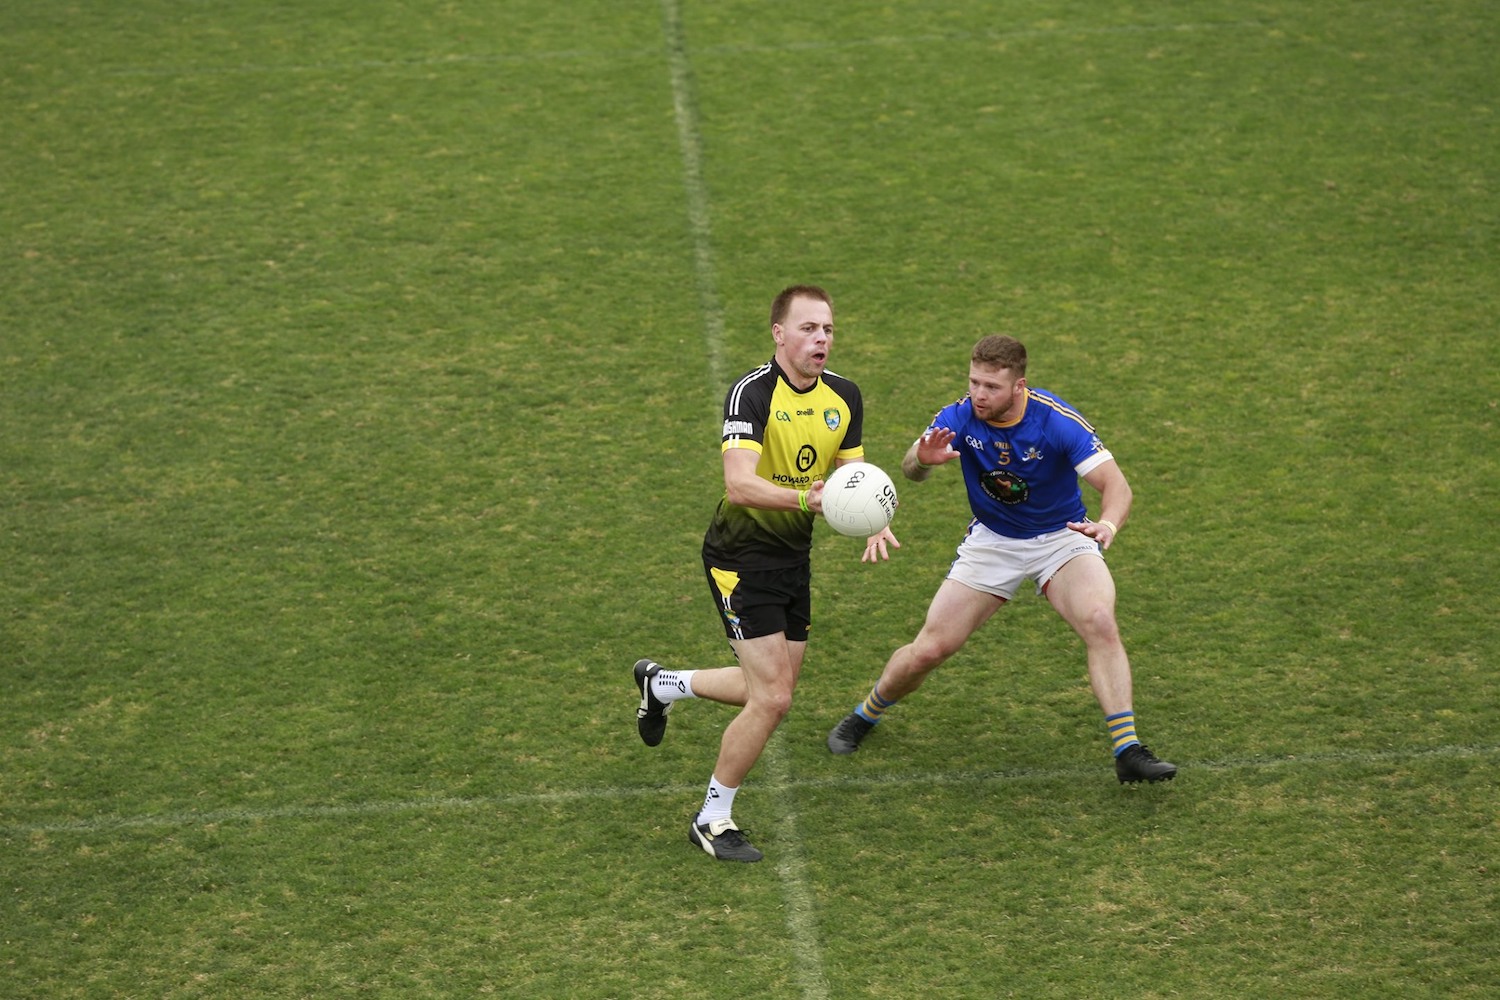 West Coast Sevens San Diego Gaelic Sports tournament at Southwestern College on May 25